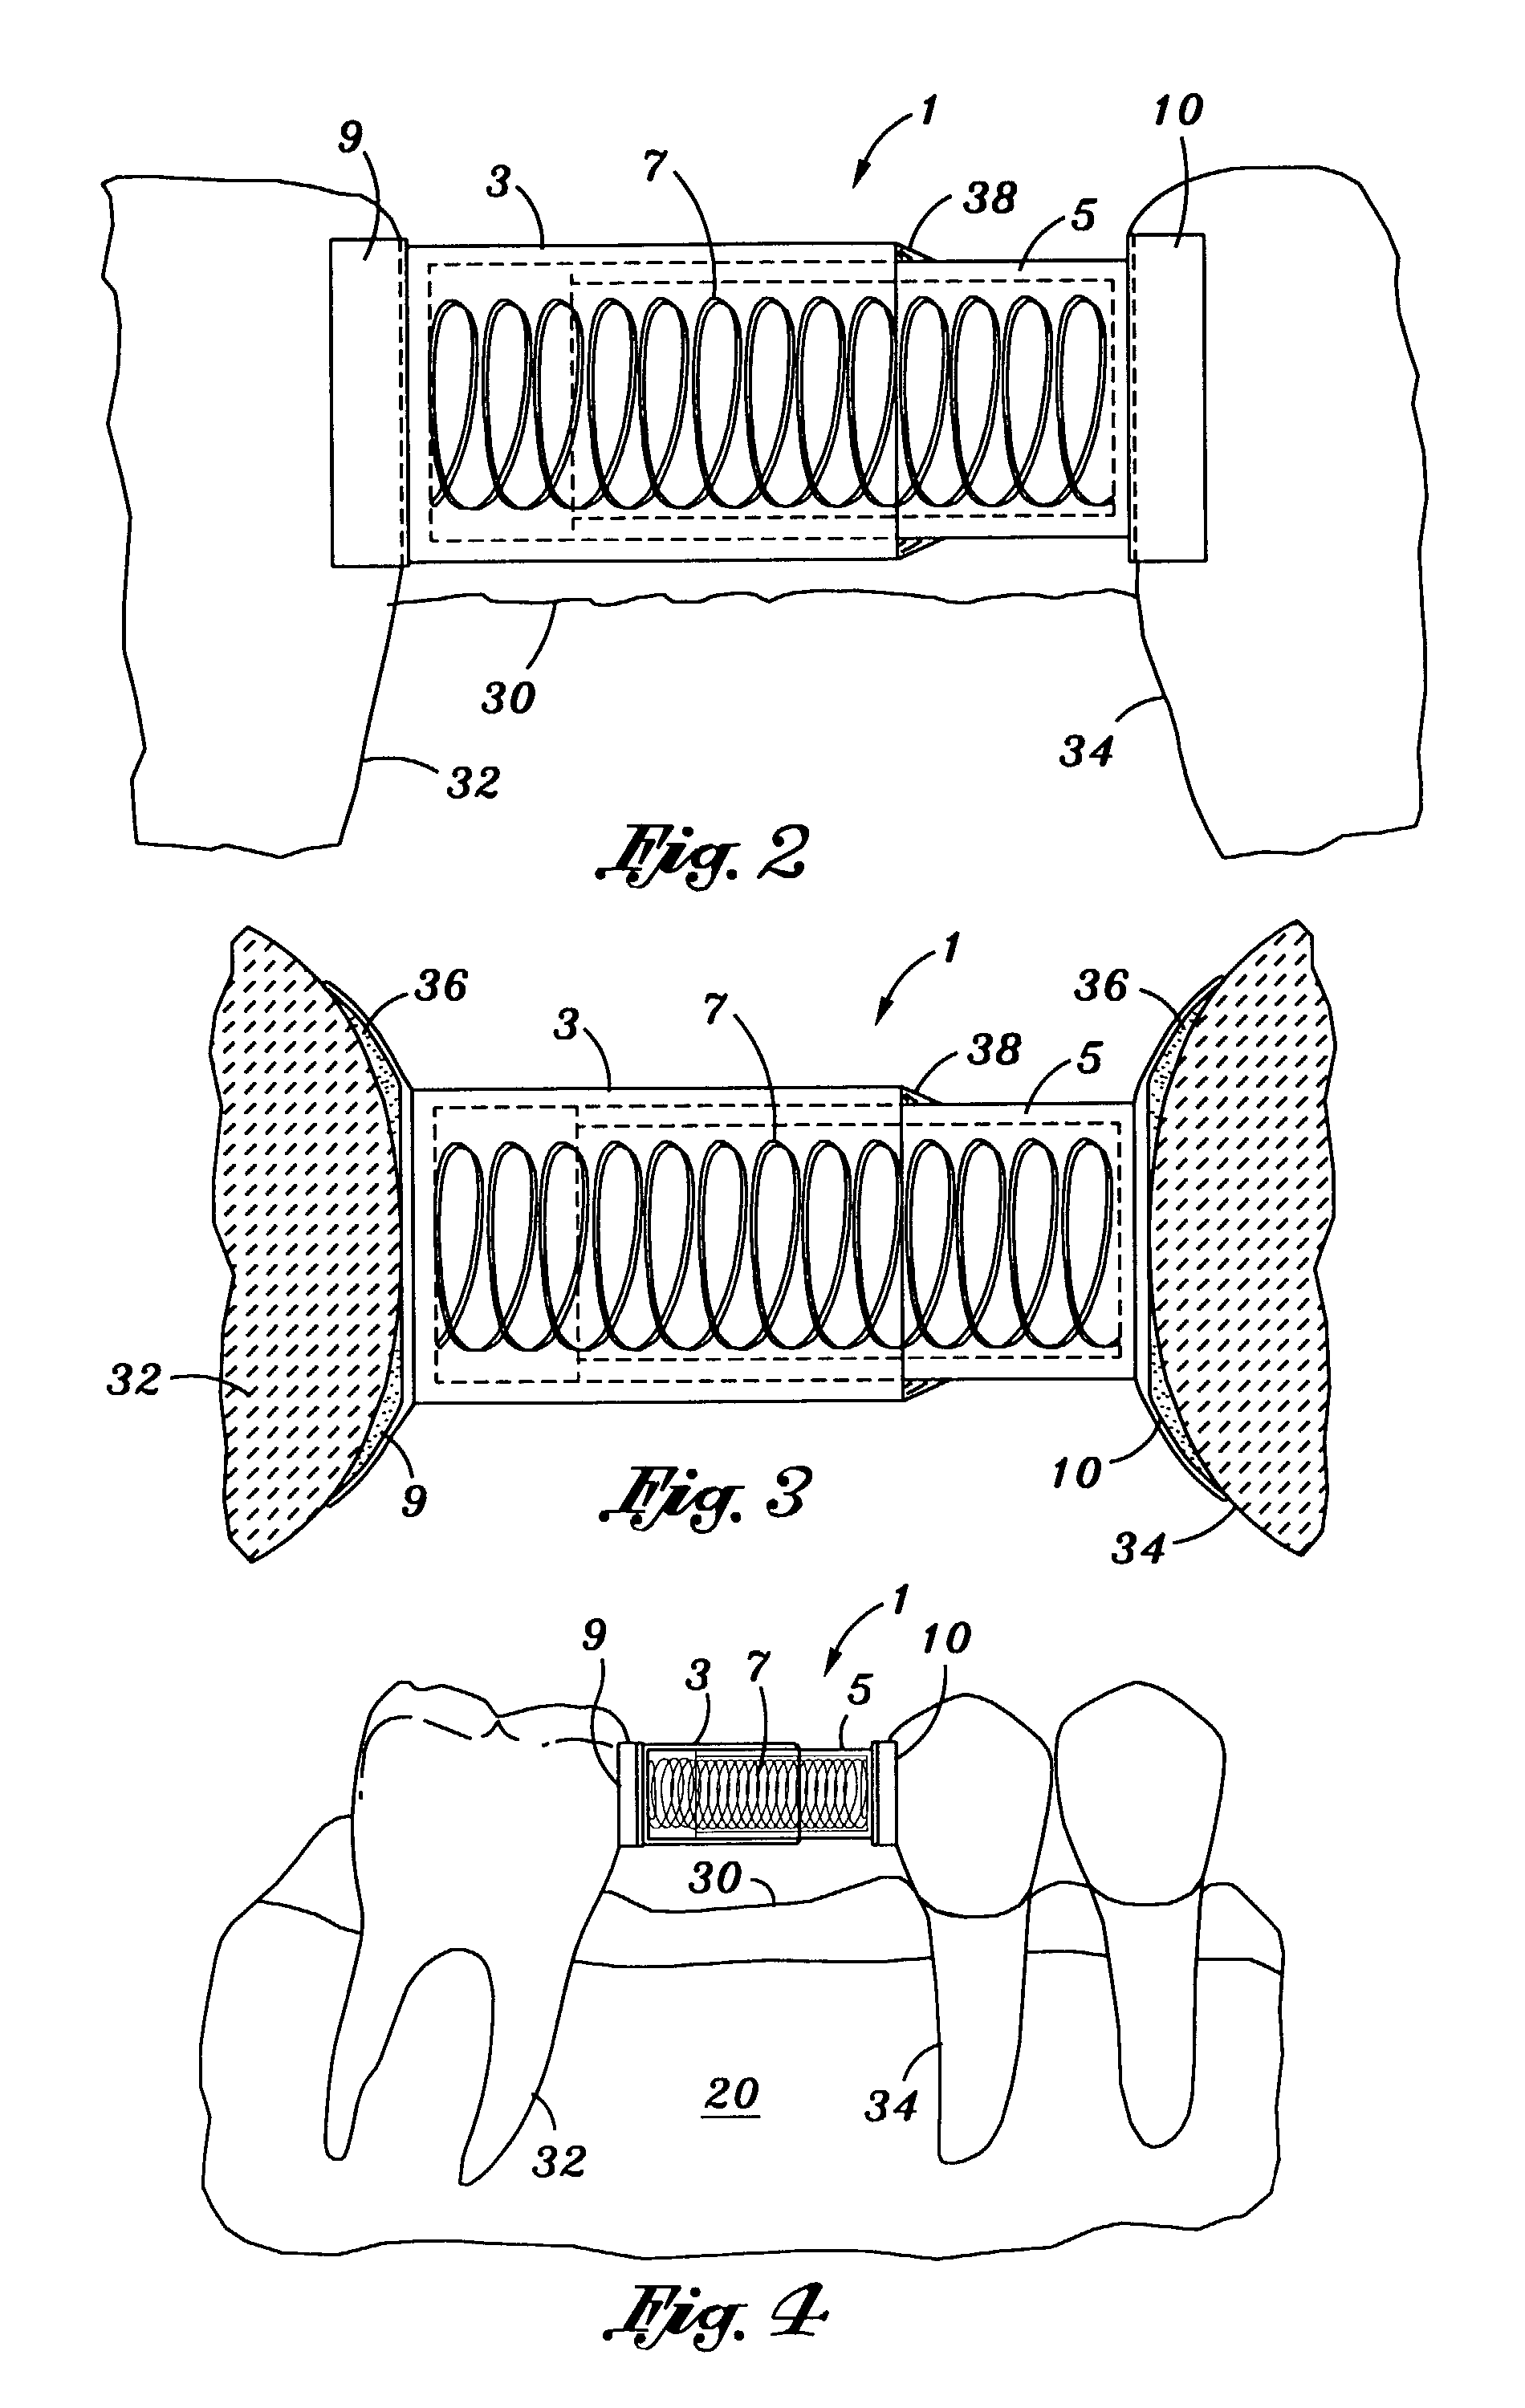 Adjustable tooth spreading and uprighting device